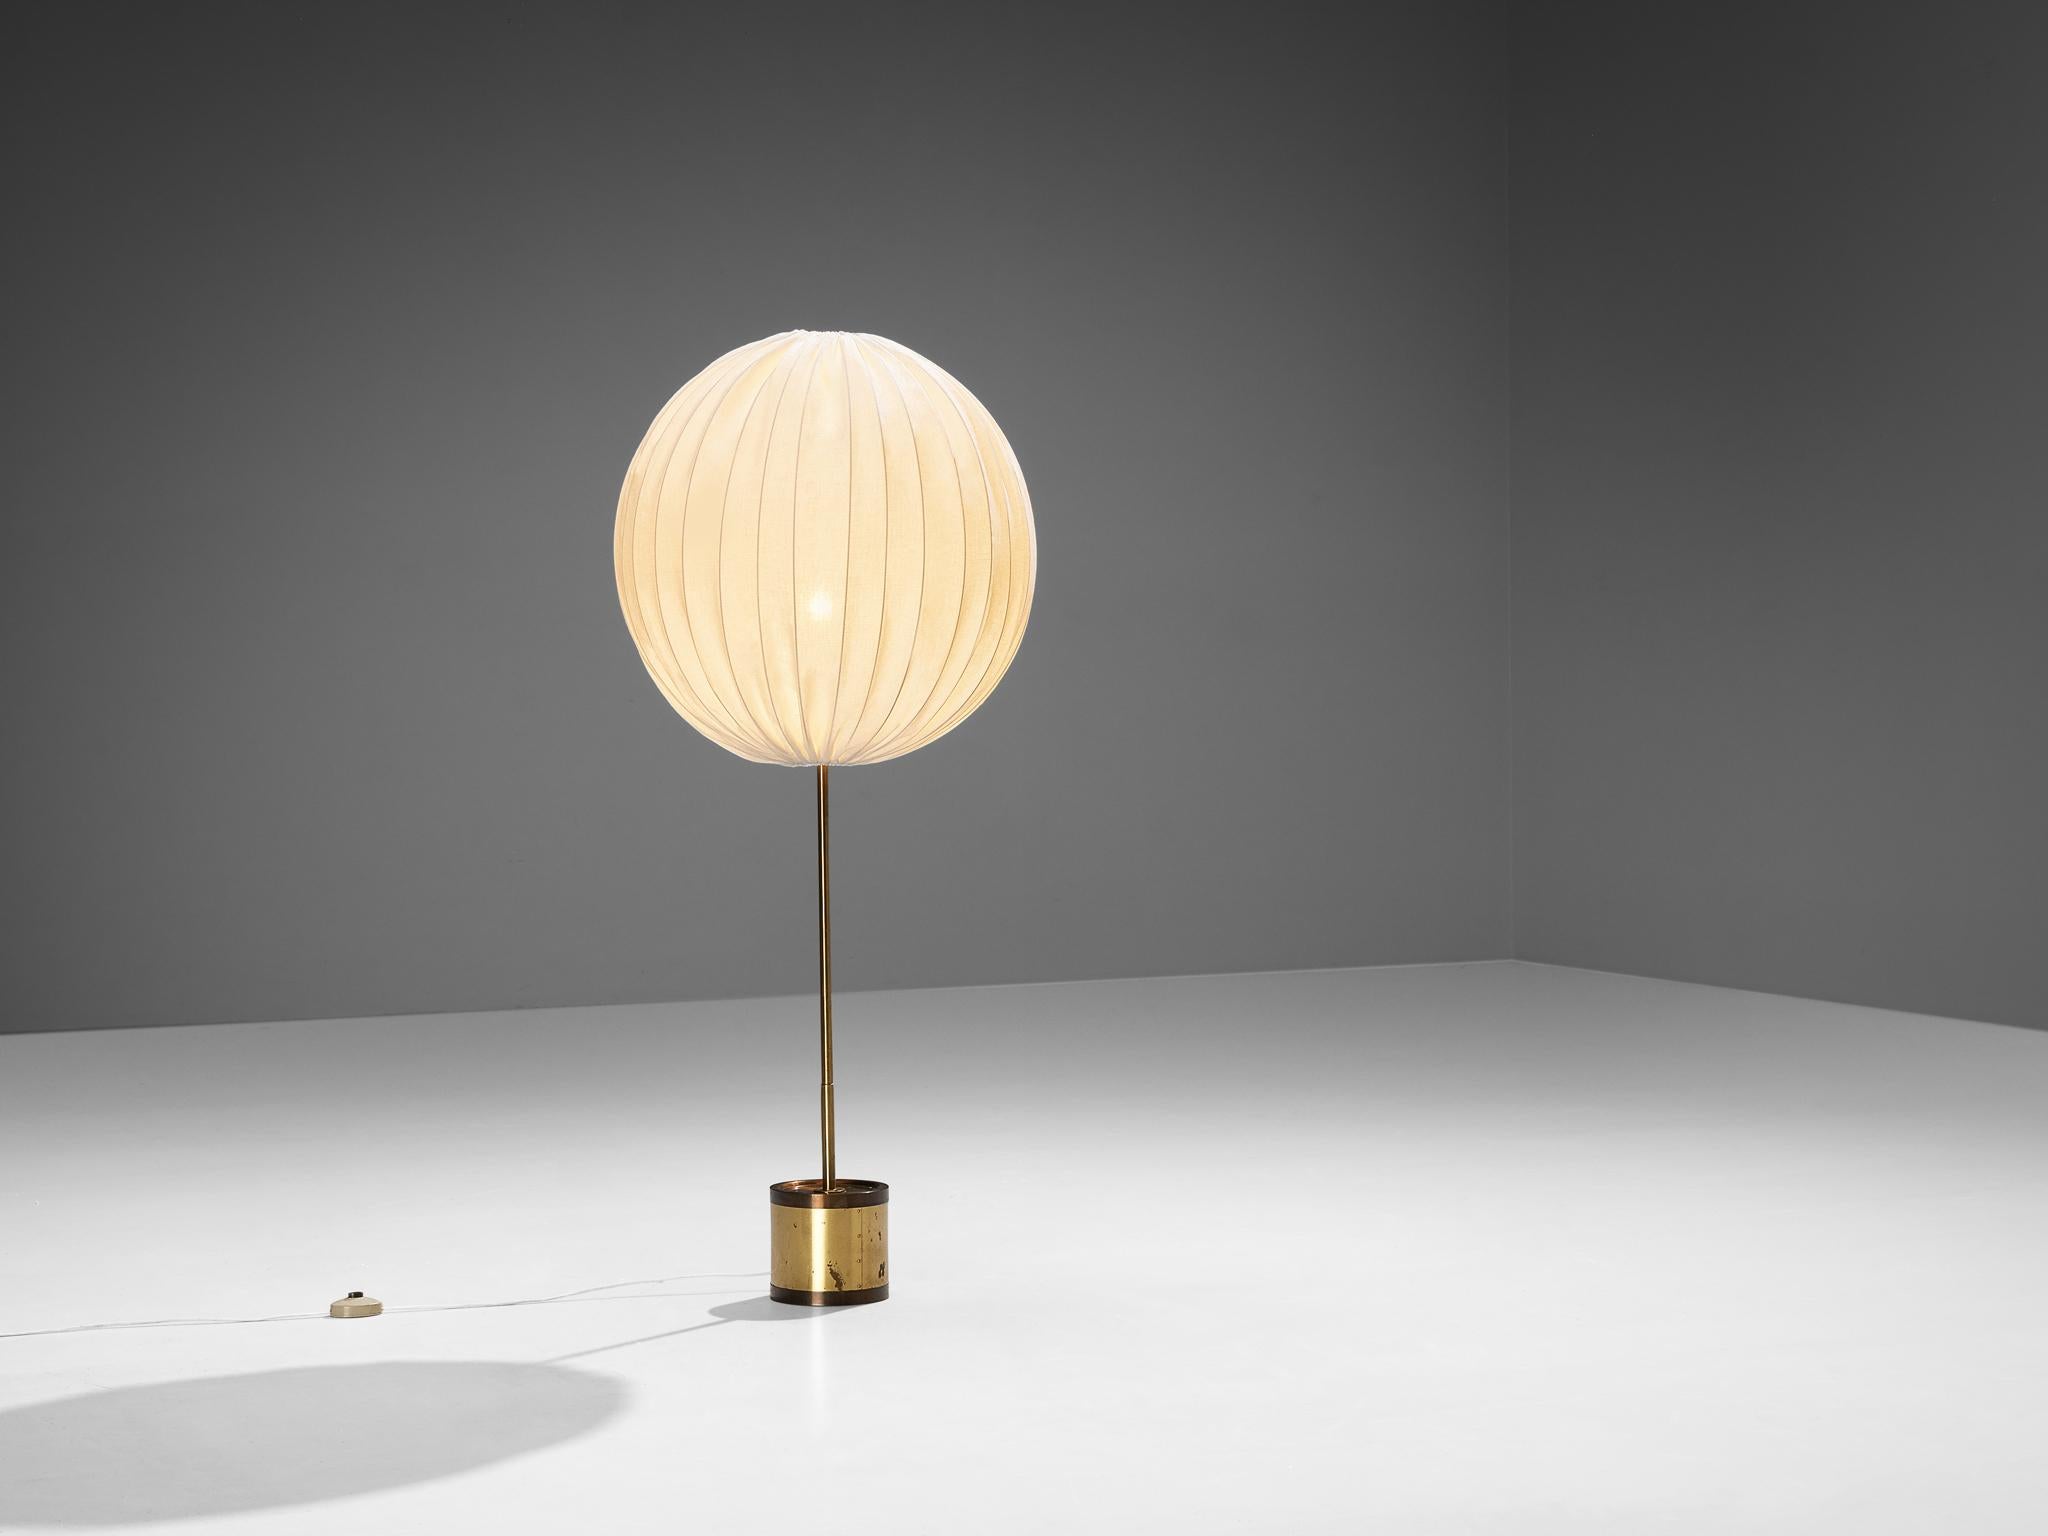 Hans-Agne Jakobsson for Hans-Agne Jakobsson AB in Markaryd, Sweden, floor lamp, model G123, brass, fabric, metal, Sweden, 1960s

This playful 'Balloon' lamp was designed by Hans-Agne Jakobsson in the 1960s. The circular lampshade catches the eye. A